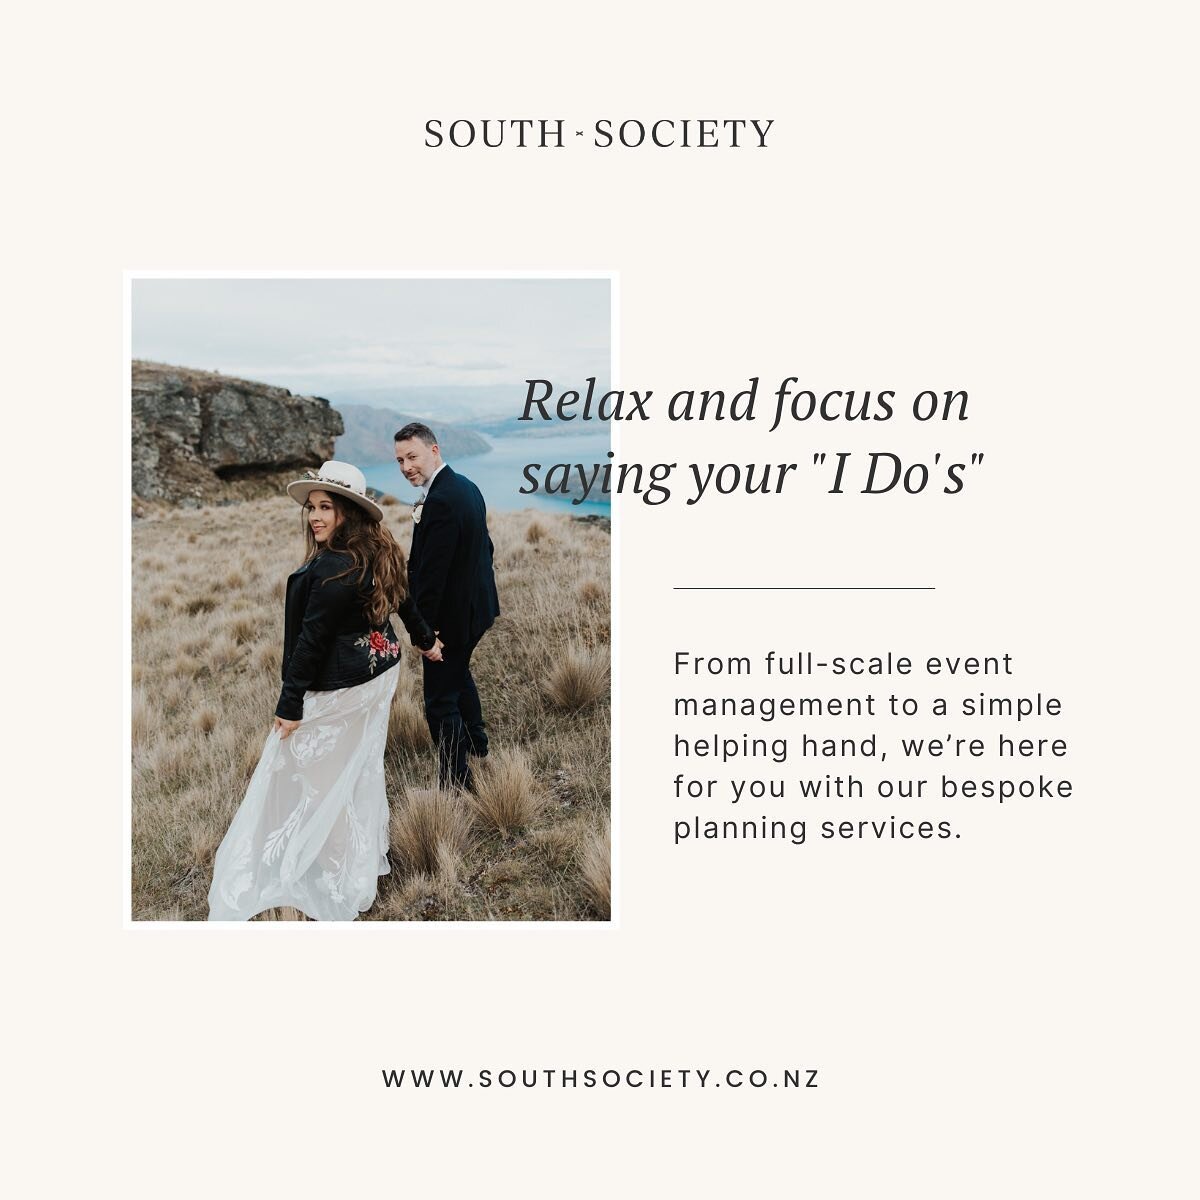 Welcome to @the.southsociety - we really mean it when we say it&rsquo;s your ultimate wedding and event planning destination!

The South Society website is bursting with ideas and we&rsquo;re excited to help you dream up your best day ever. Peruse th